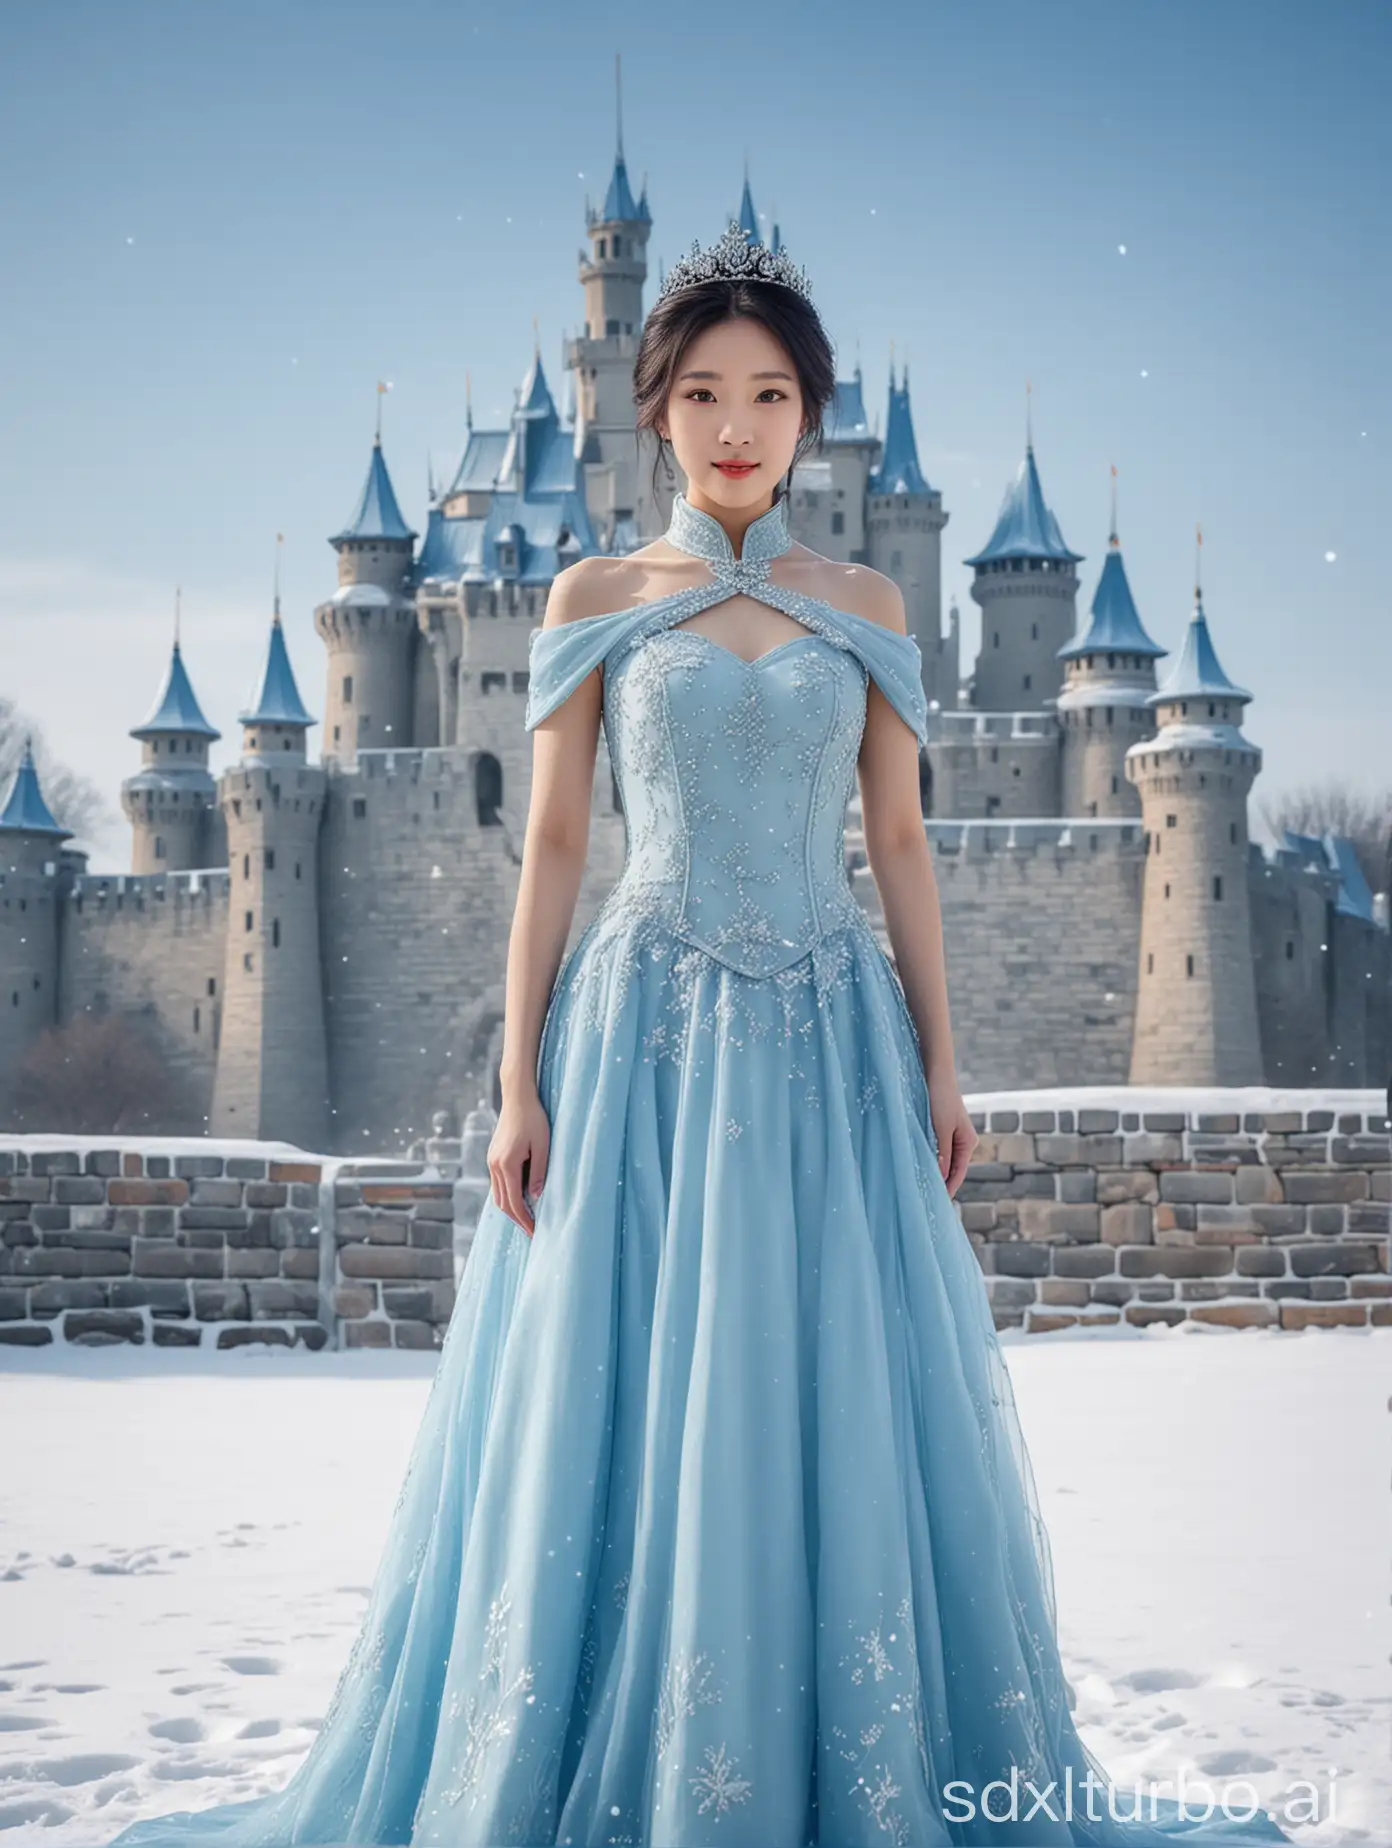 A Chinese girl, wearing a blue dress, standing in the snow, wearing a crown, princess, with a castle background, ice and snow theme